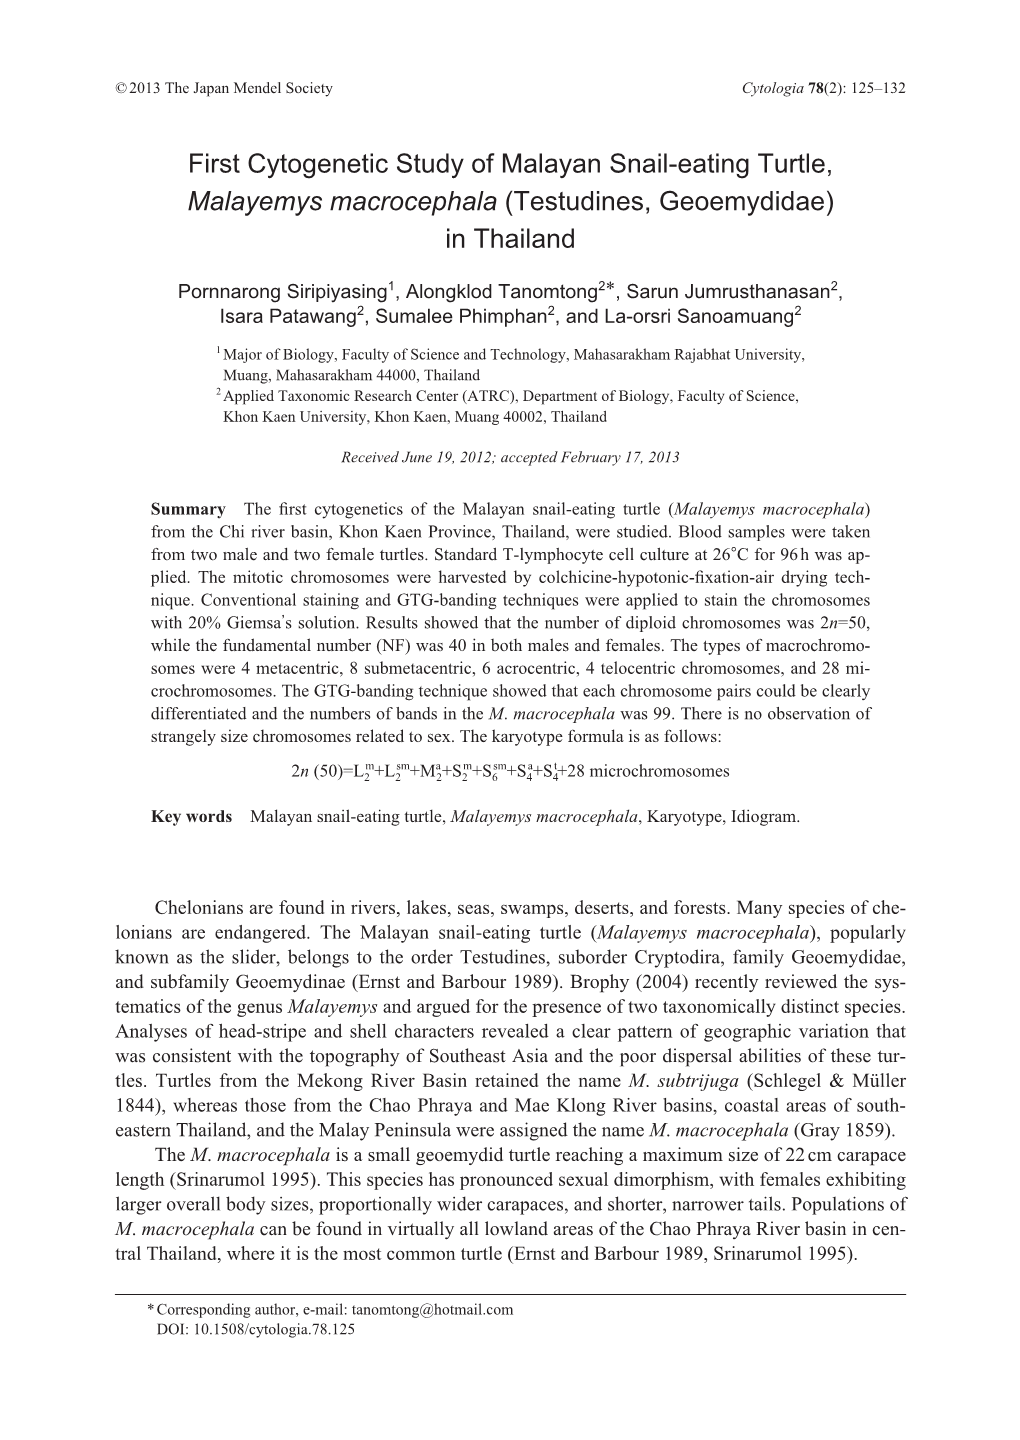 First Cytogenetic Study of Malayan Snail-Eating Turtle, Malayemys Macrocephala (Testudines, Geoemydidae) in Thailand